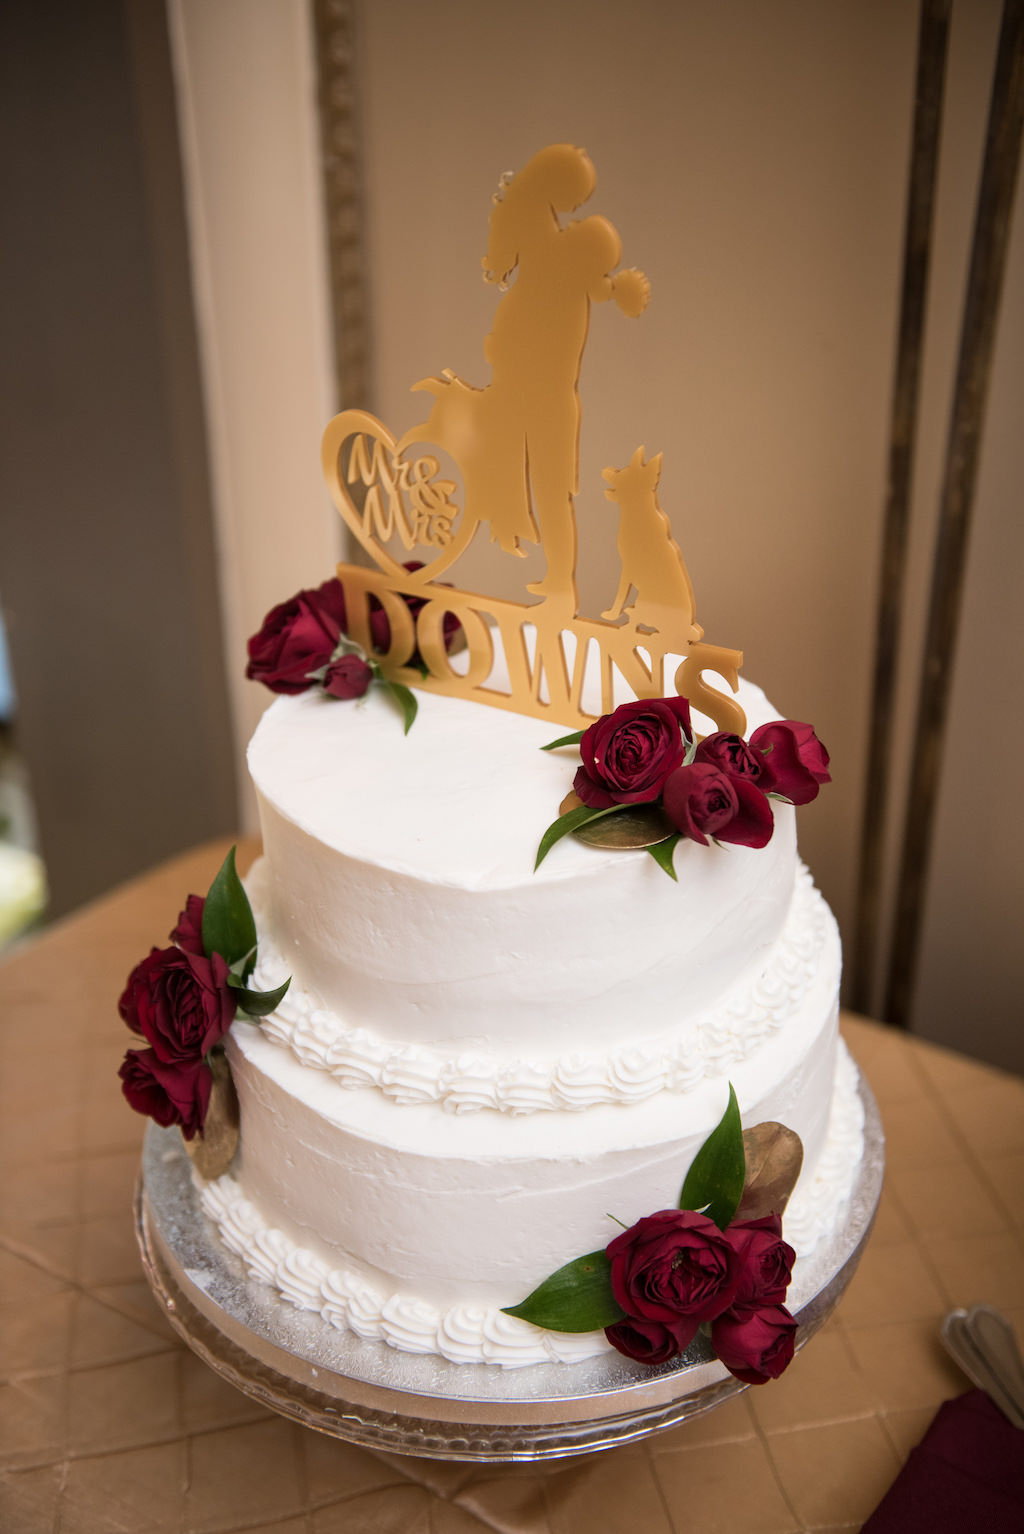 Gold and Burgundy Wedding Two tier round white Wedding Cake with Custom Silhouette Bride and Groom and Dog Cake Topper with Red Roses on Silver Cake Stand